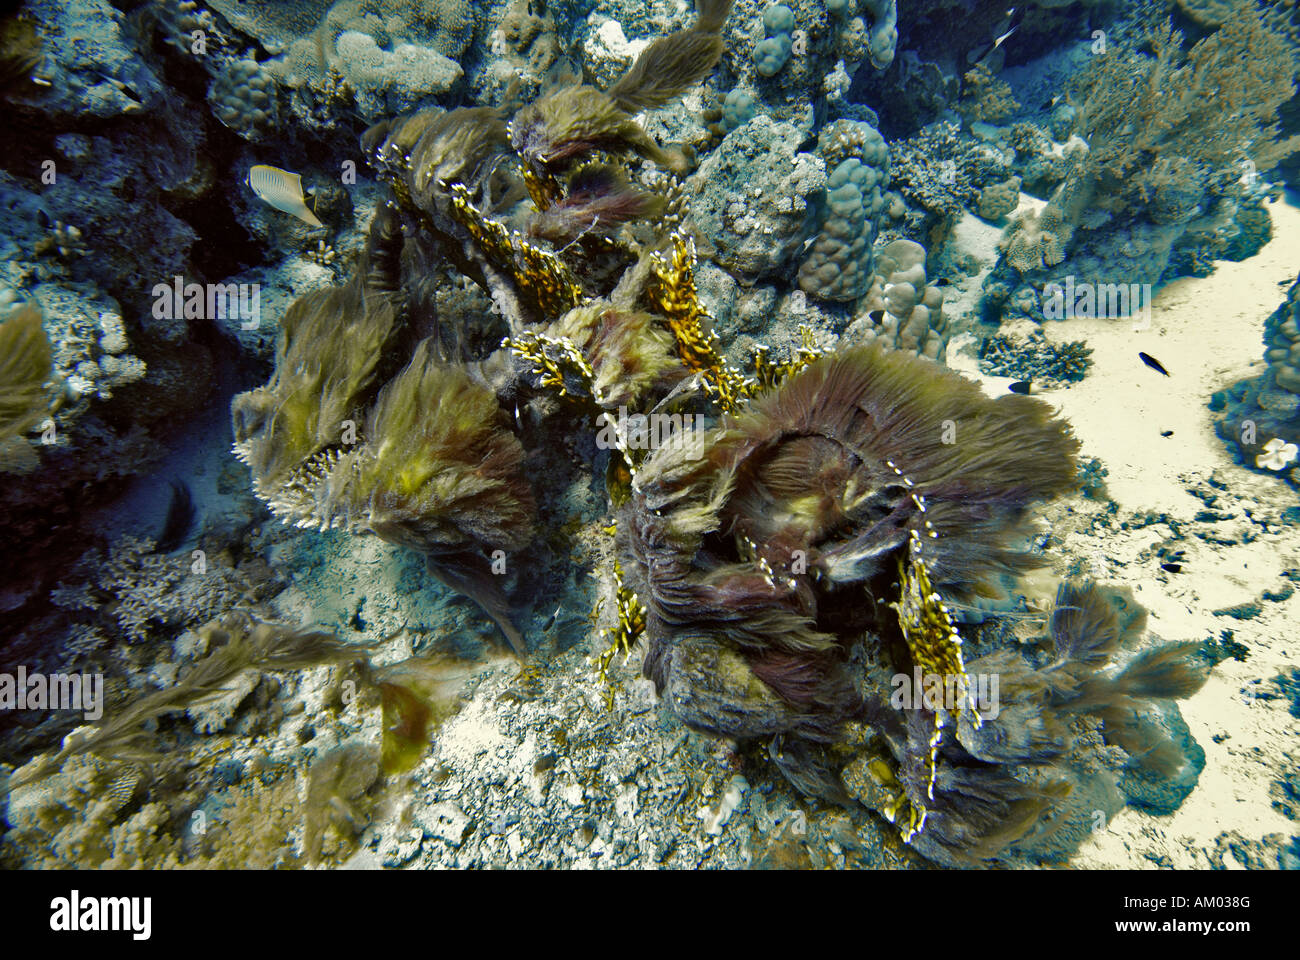 Branching Fire Coral, Millepor tortuosa, alga covered, Red Sea, Egypt Stock Photo